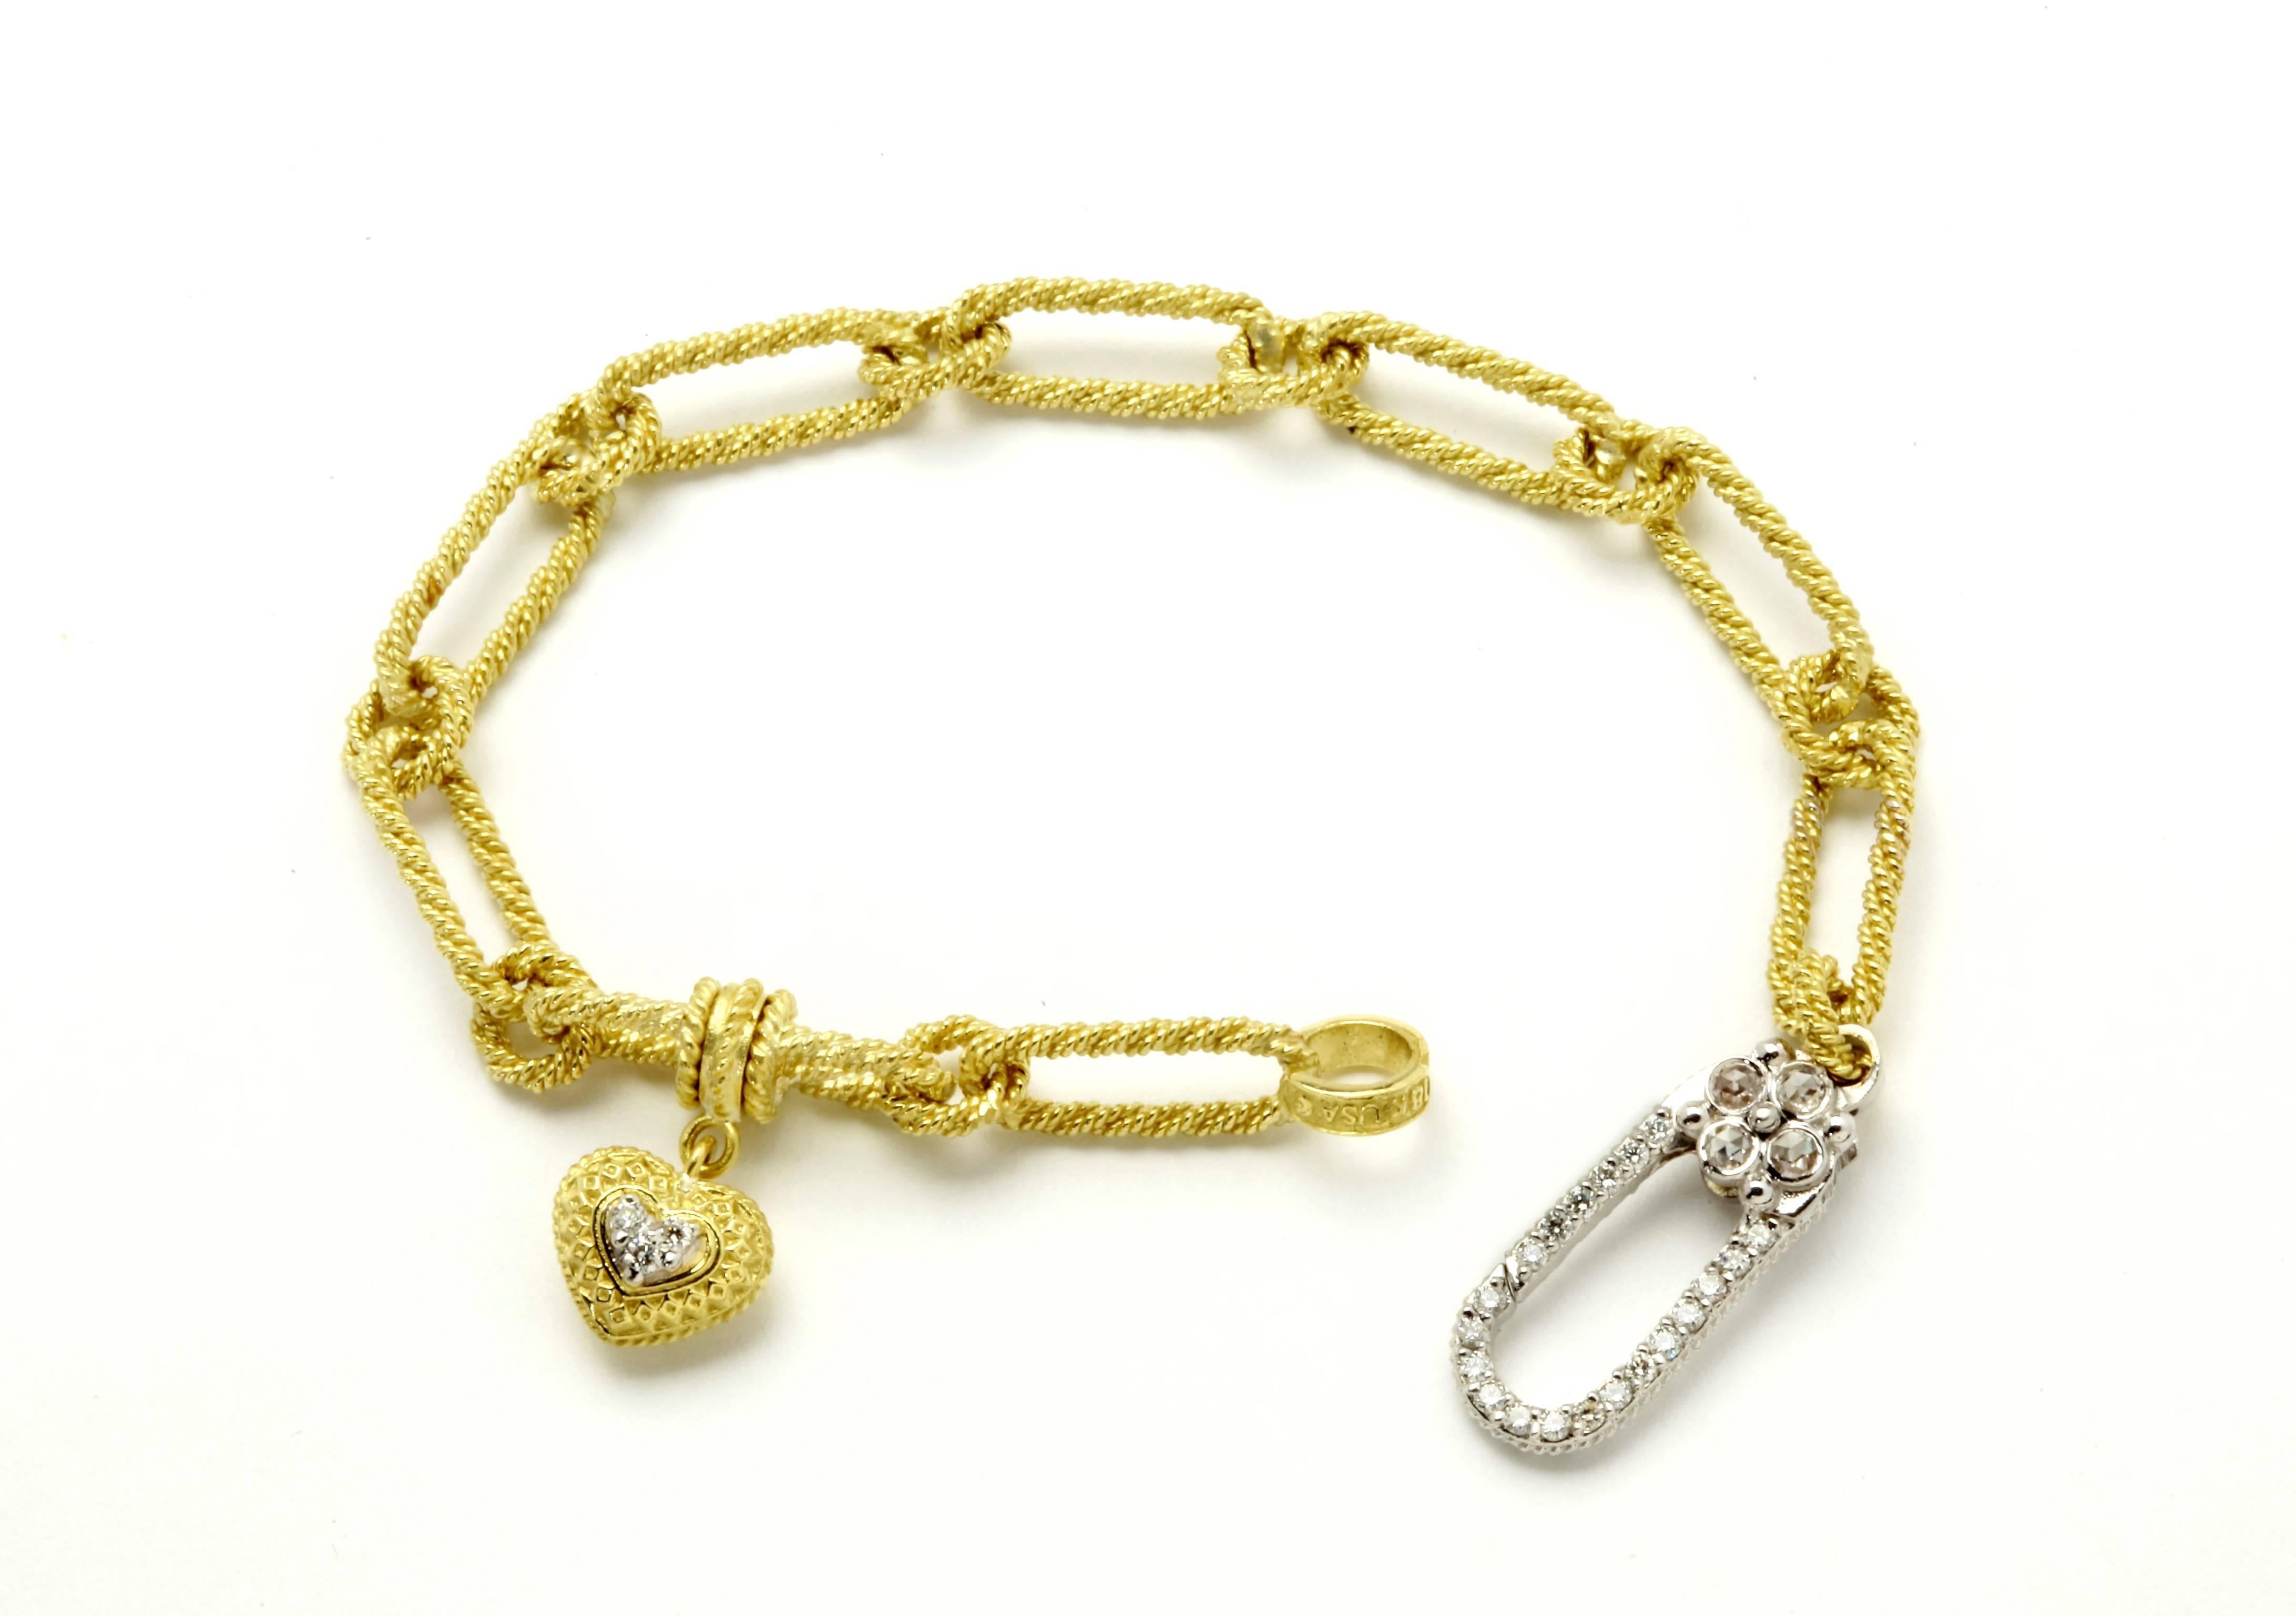 IF YOU ARE REALLY INTERESTED, CONTACT US WITH ANY REASONABLE OFFER. WE WILL TRY OUR BEST TO MAKE YOU HAPPY!

18K Yellow Gold Bracelet with diamonds and dangling heart

Diamonds cover both sides of clasp and on heart

Double sided clasp has 0.16ct.